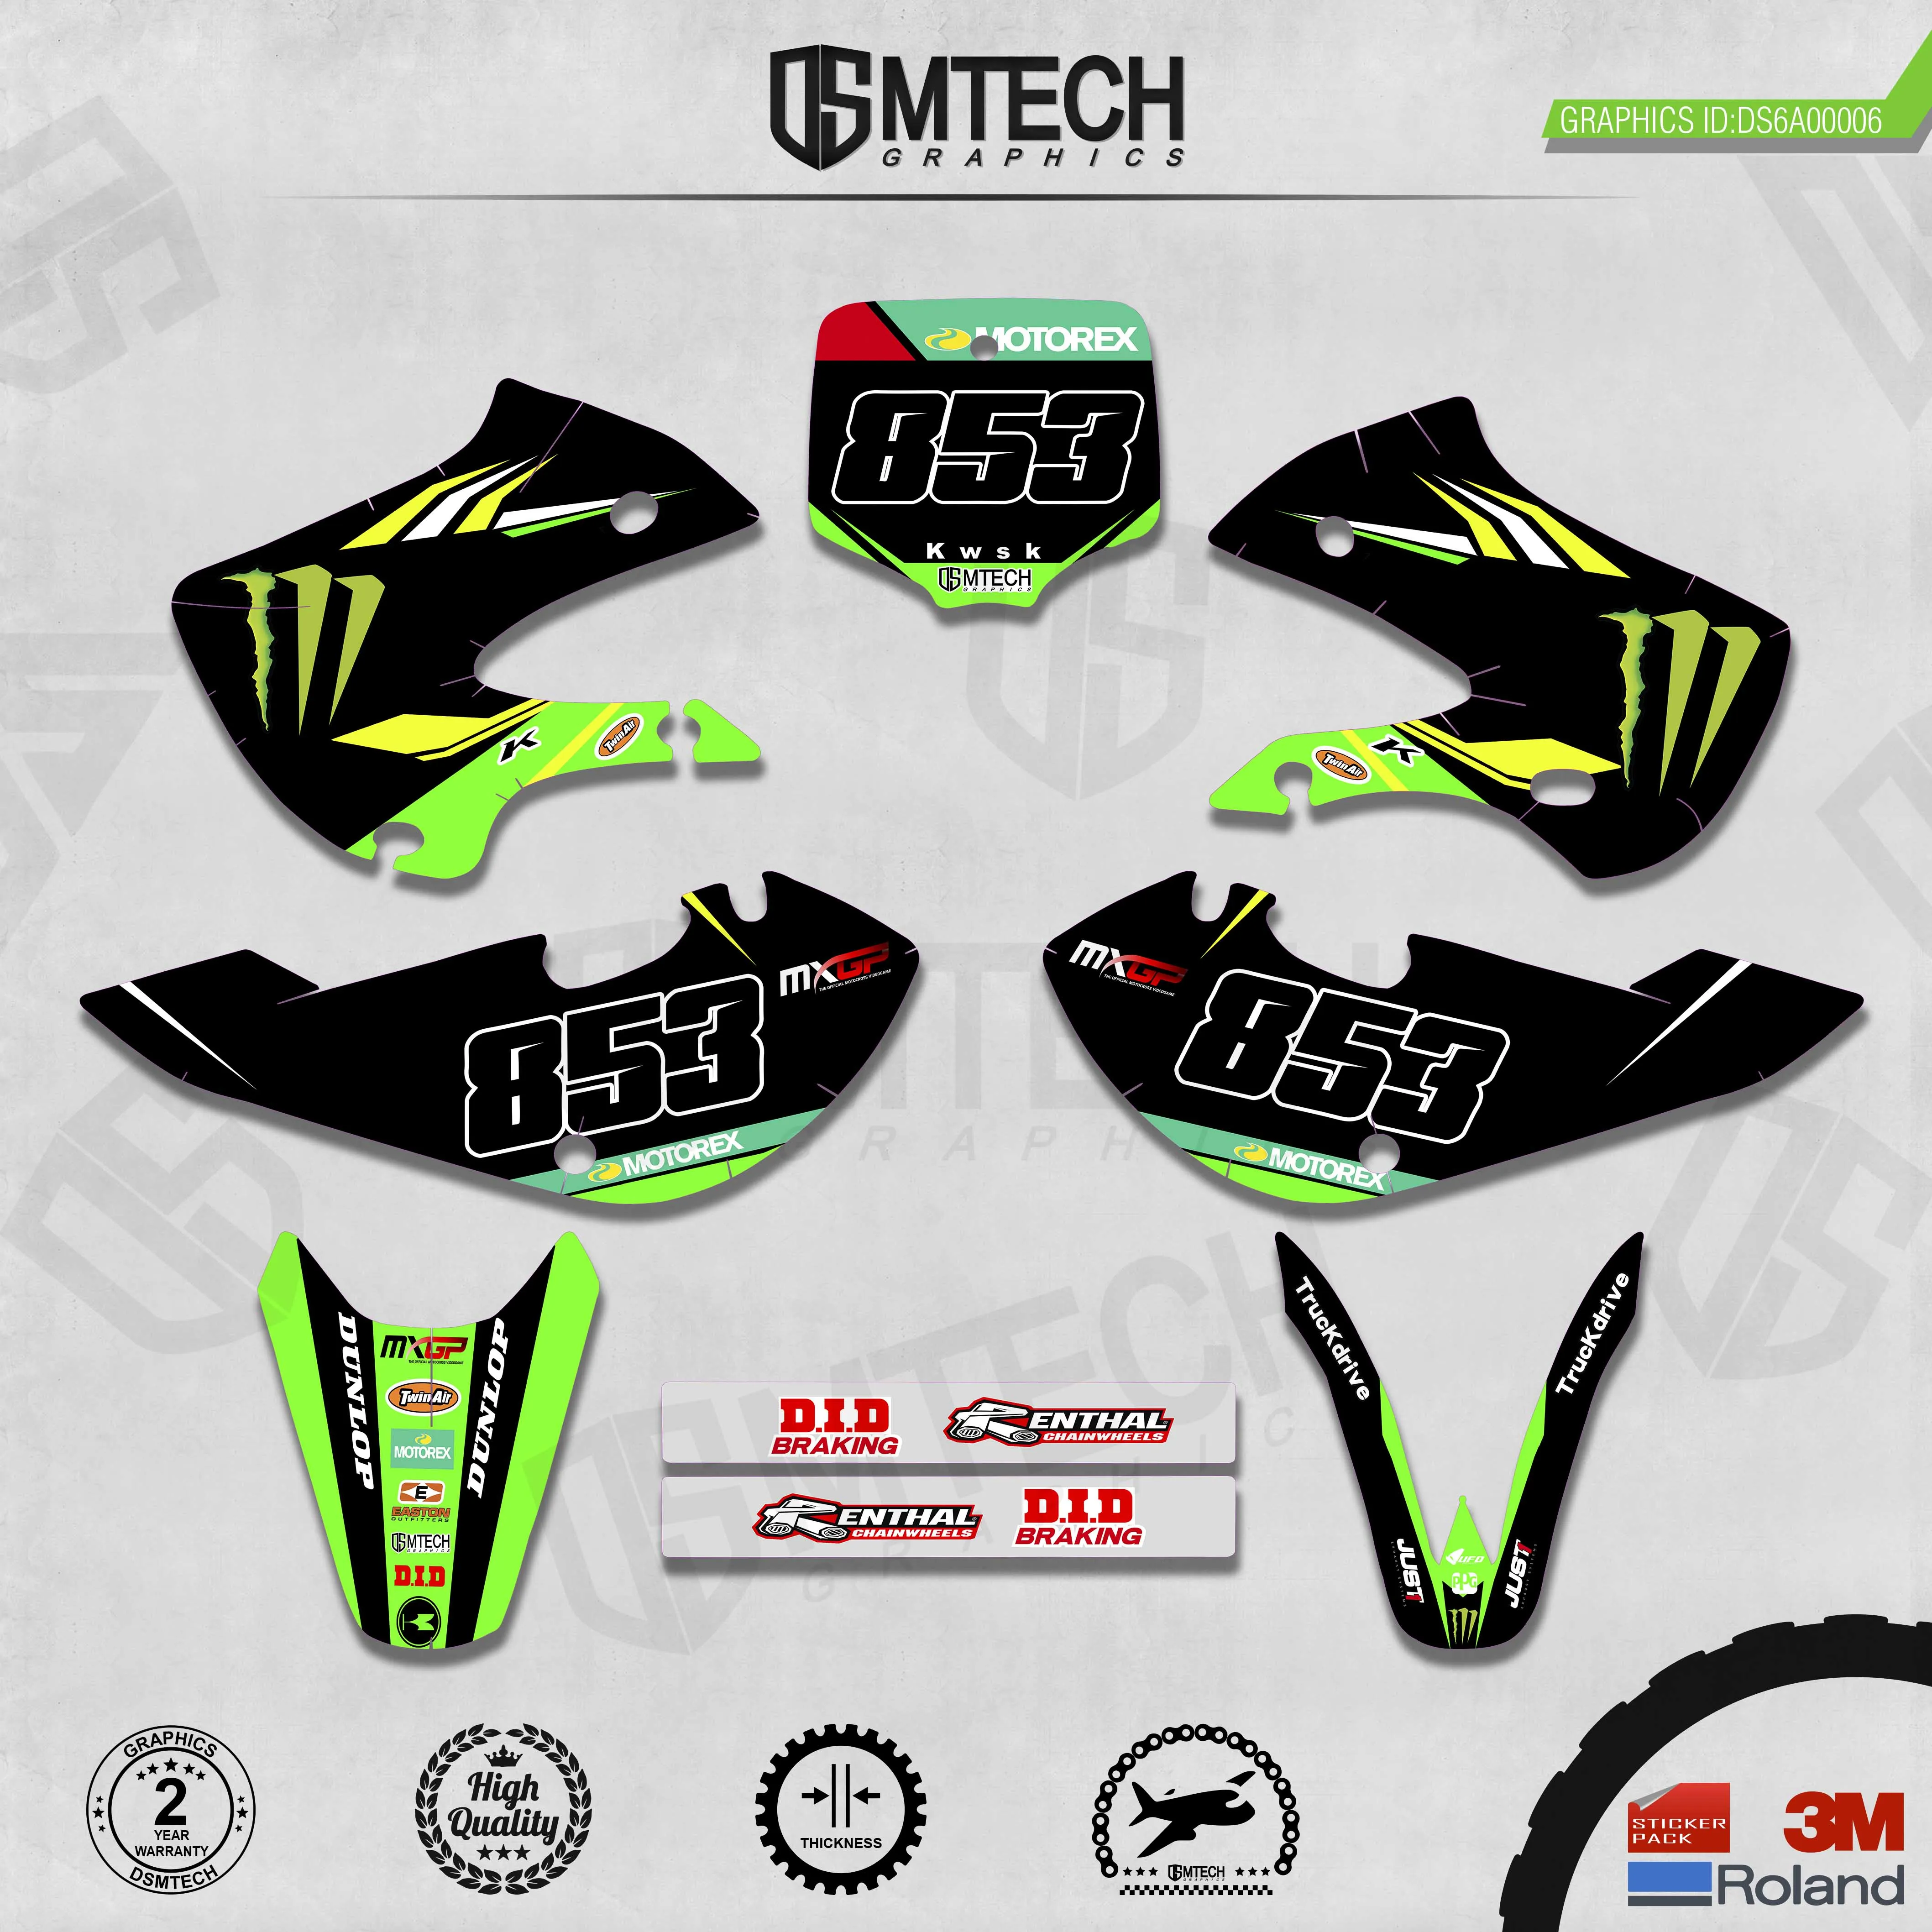 DSMTECH Customized Team Graphics Backgrounds Decals 3M Custom Stickers For KAWASAKI  2000-2020 KX65 006